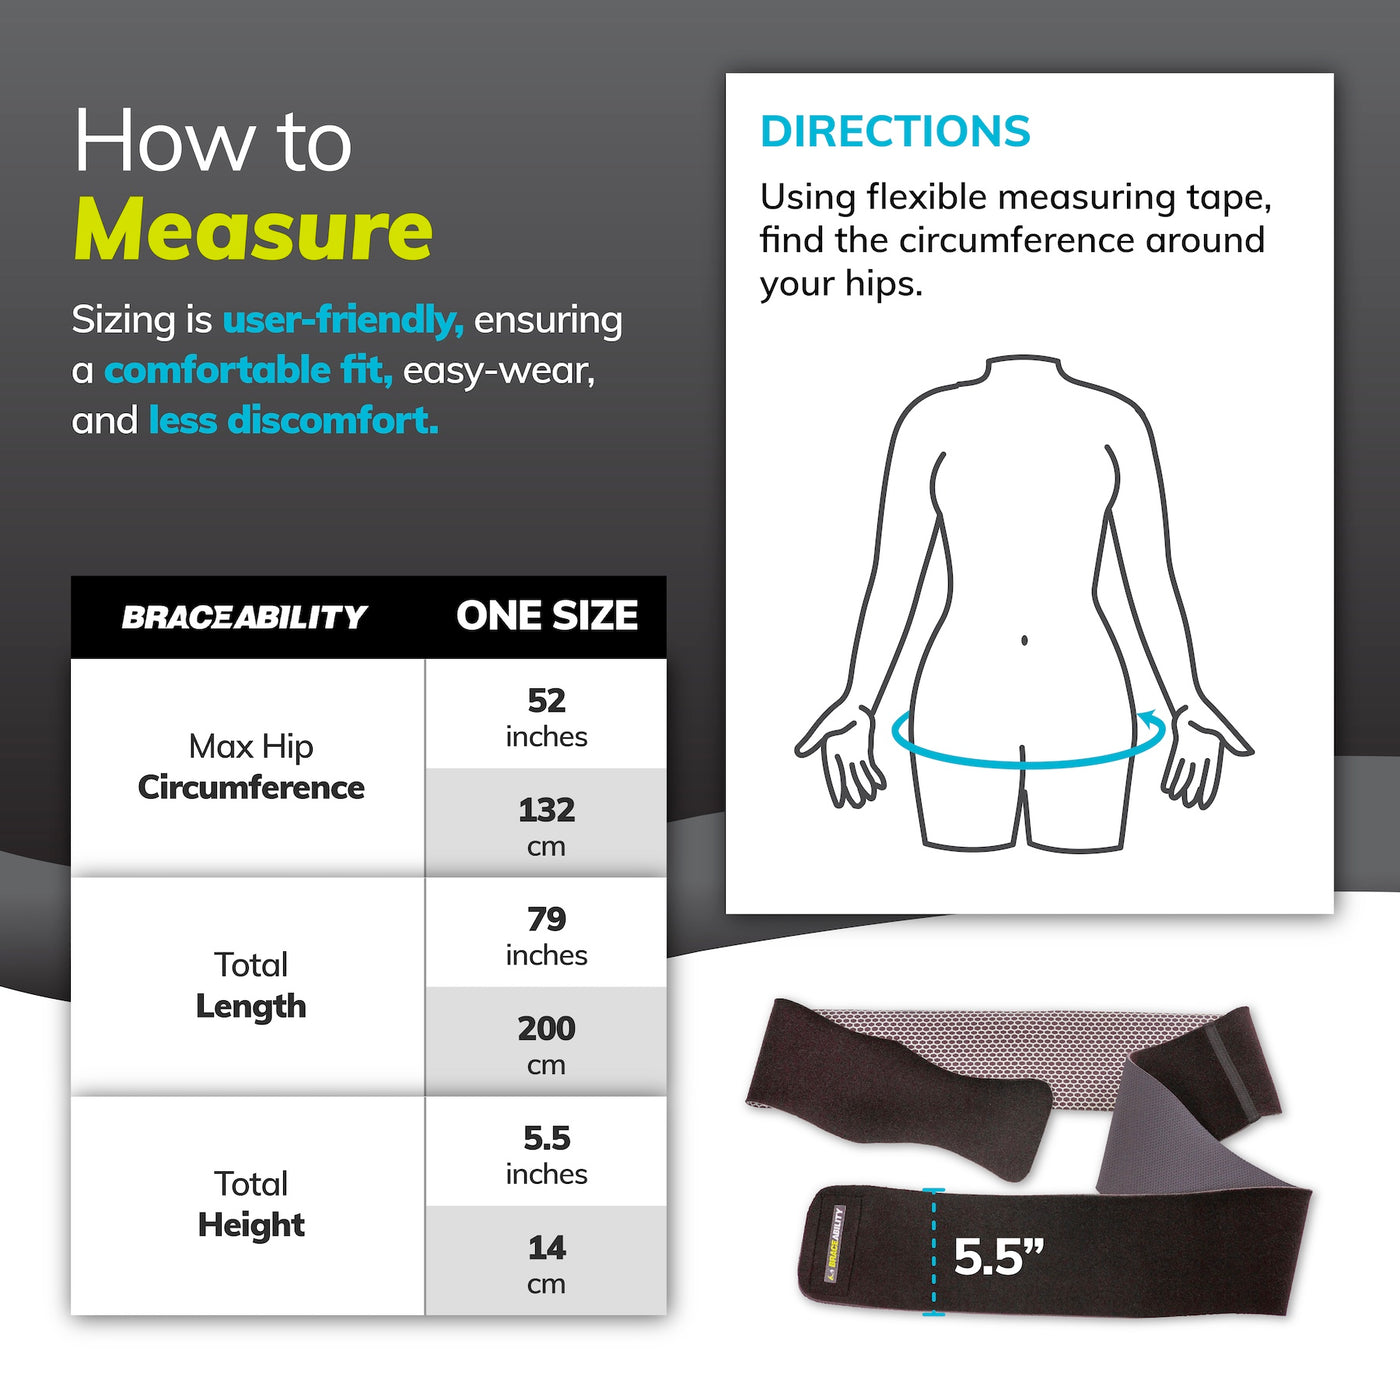 Why CAPE Garments are Better than Pneumatic Compression Devices